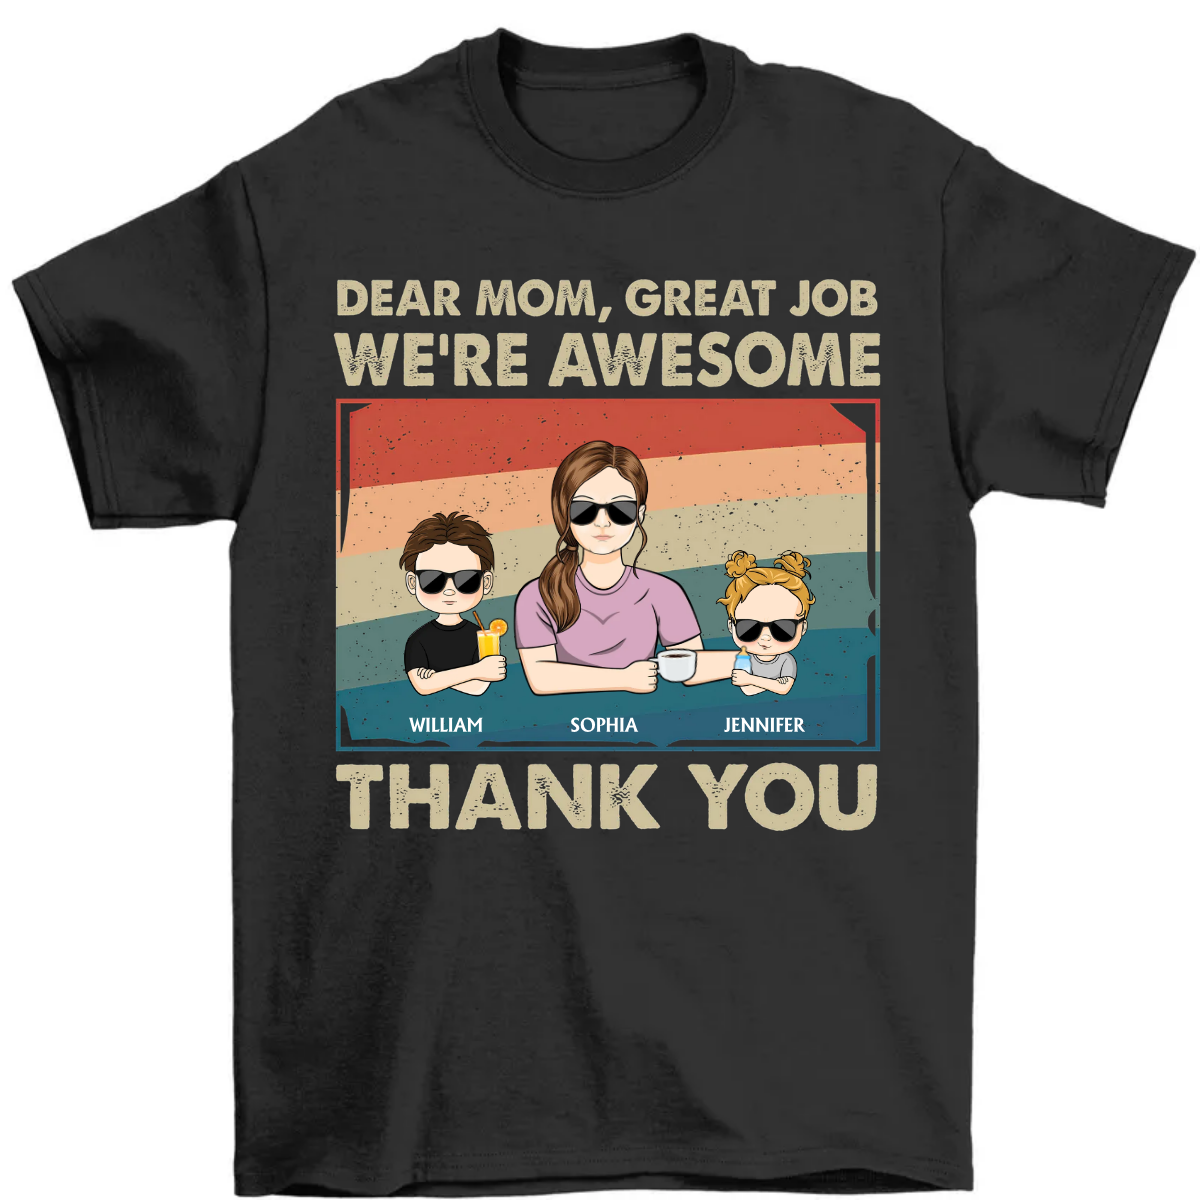 Dear Mom Great Job We're Awesome Thank You - Funny Gift For Mom, Mother, Mama, Grandma - Personalized T Shirt